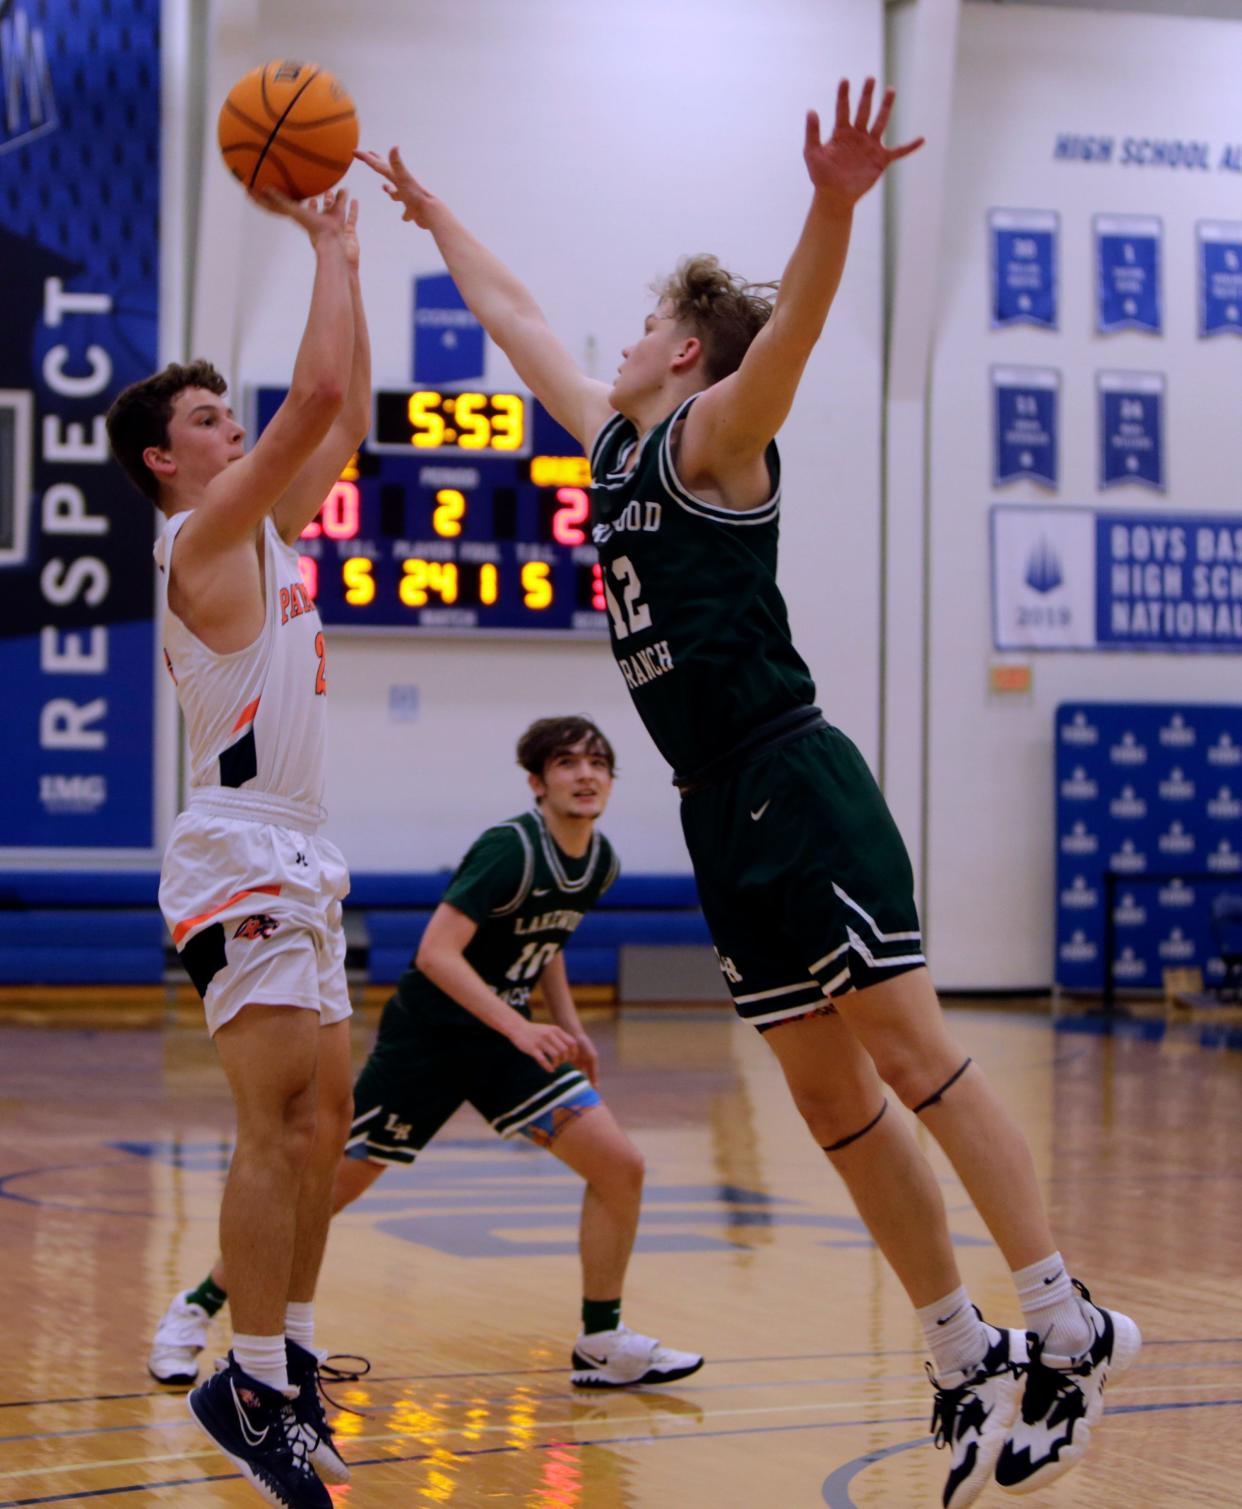 Landon Dempsey of Bradenton Christian School looks to shoot over Connor "CJ" Kerr of Lakewood Ranch High during the Ascenders Classic on Friday evening at IMG Academy in Bradenton.